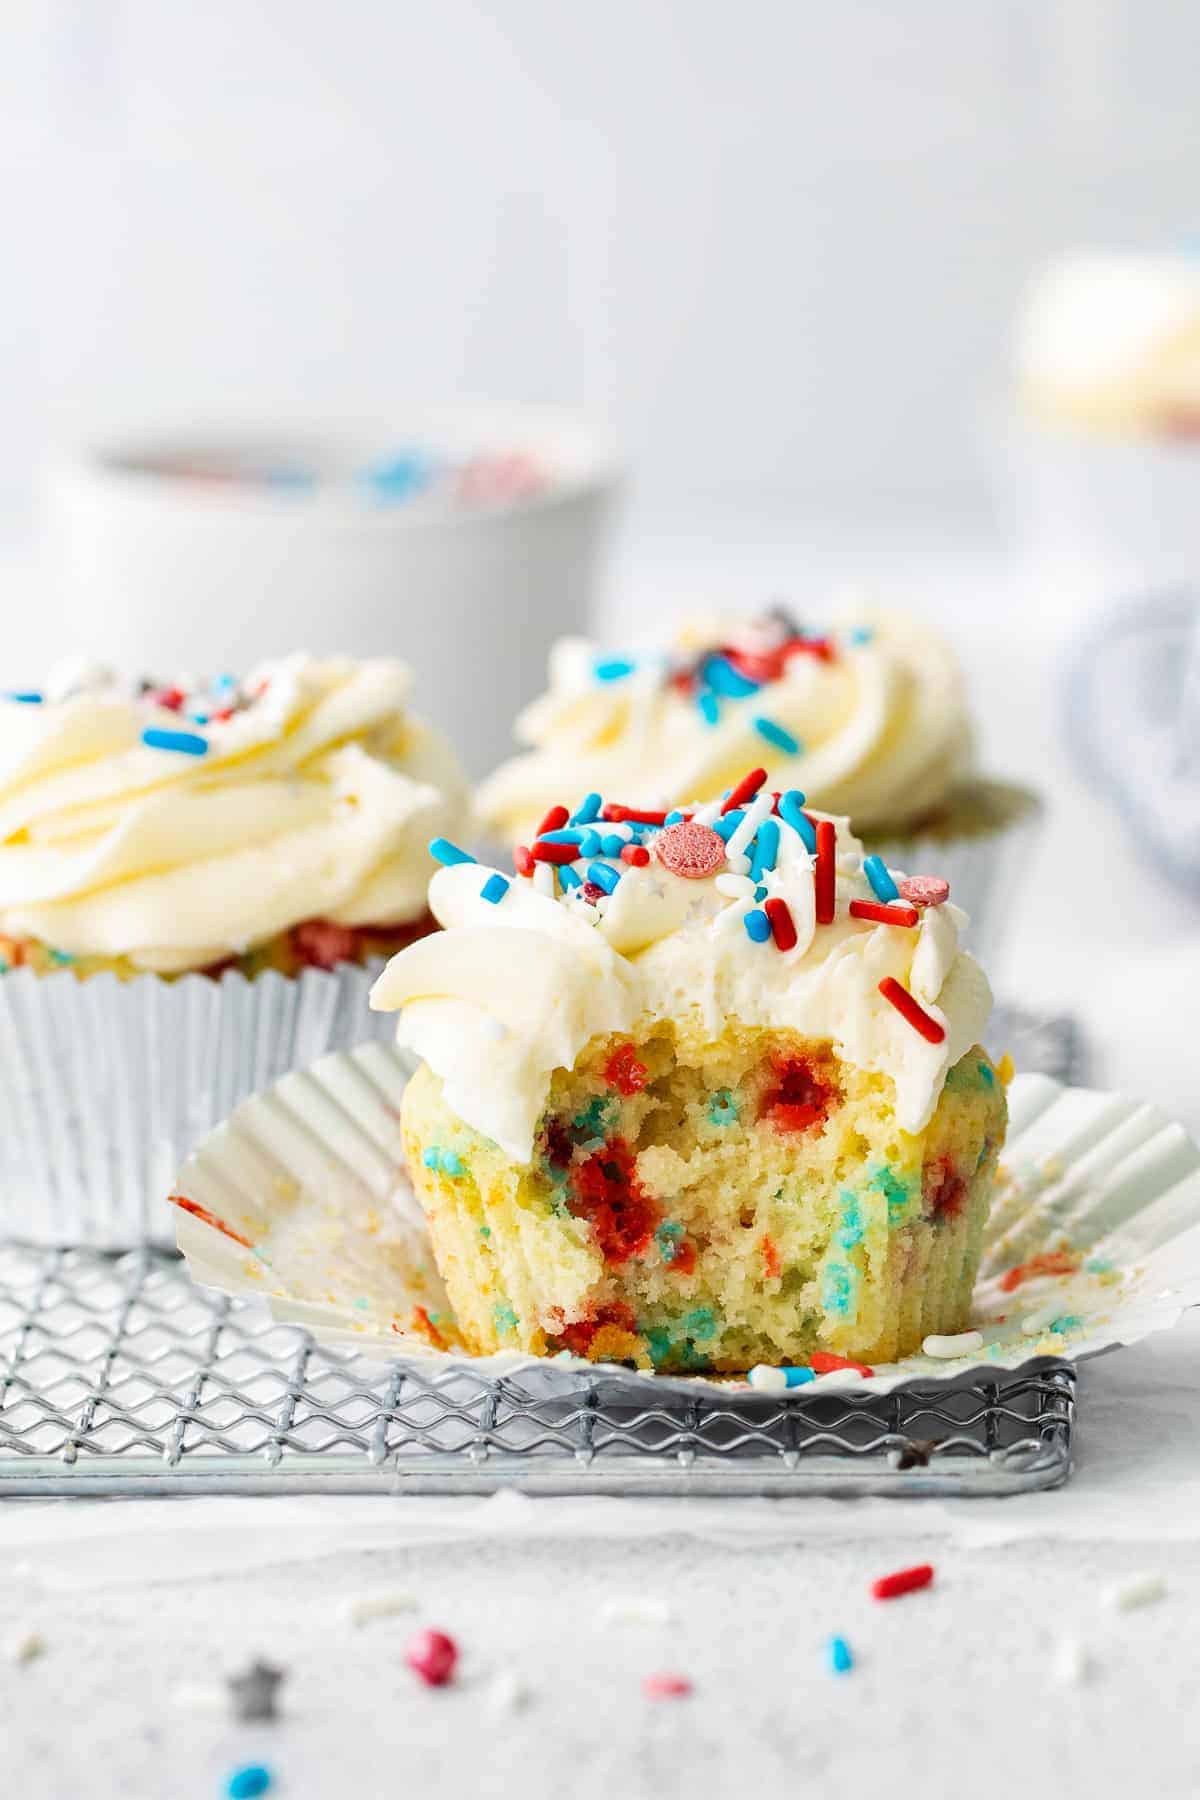 https://easydessertrecipes.com/wp-content/uploads/2021/06/fourth-of-july-cupcakes-recipe-7.jpg